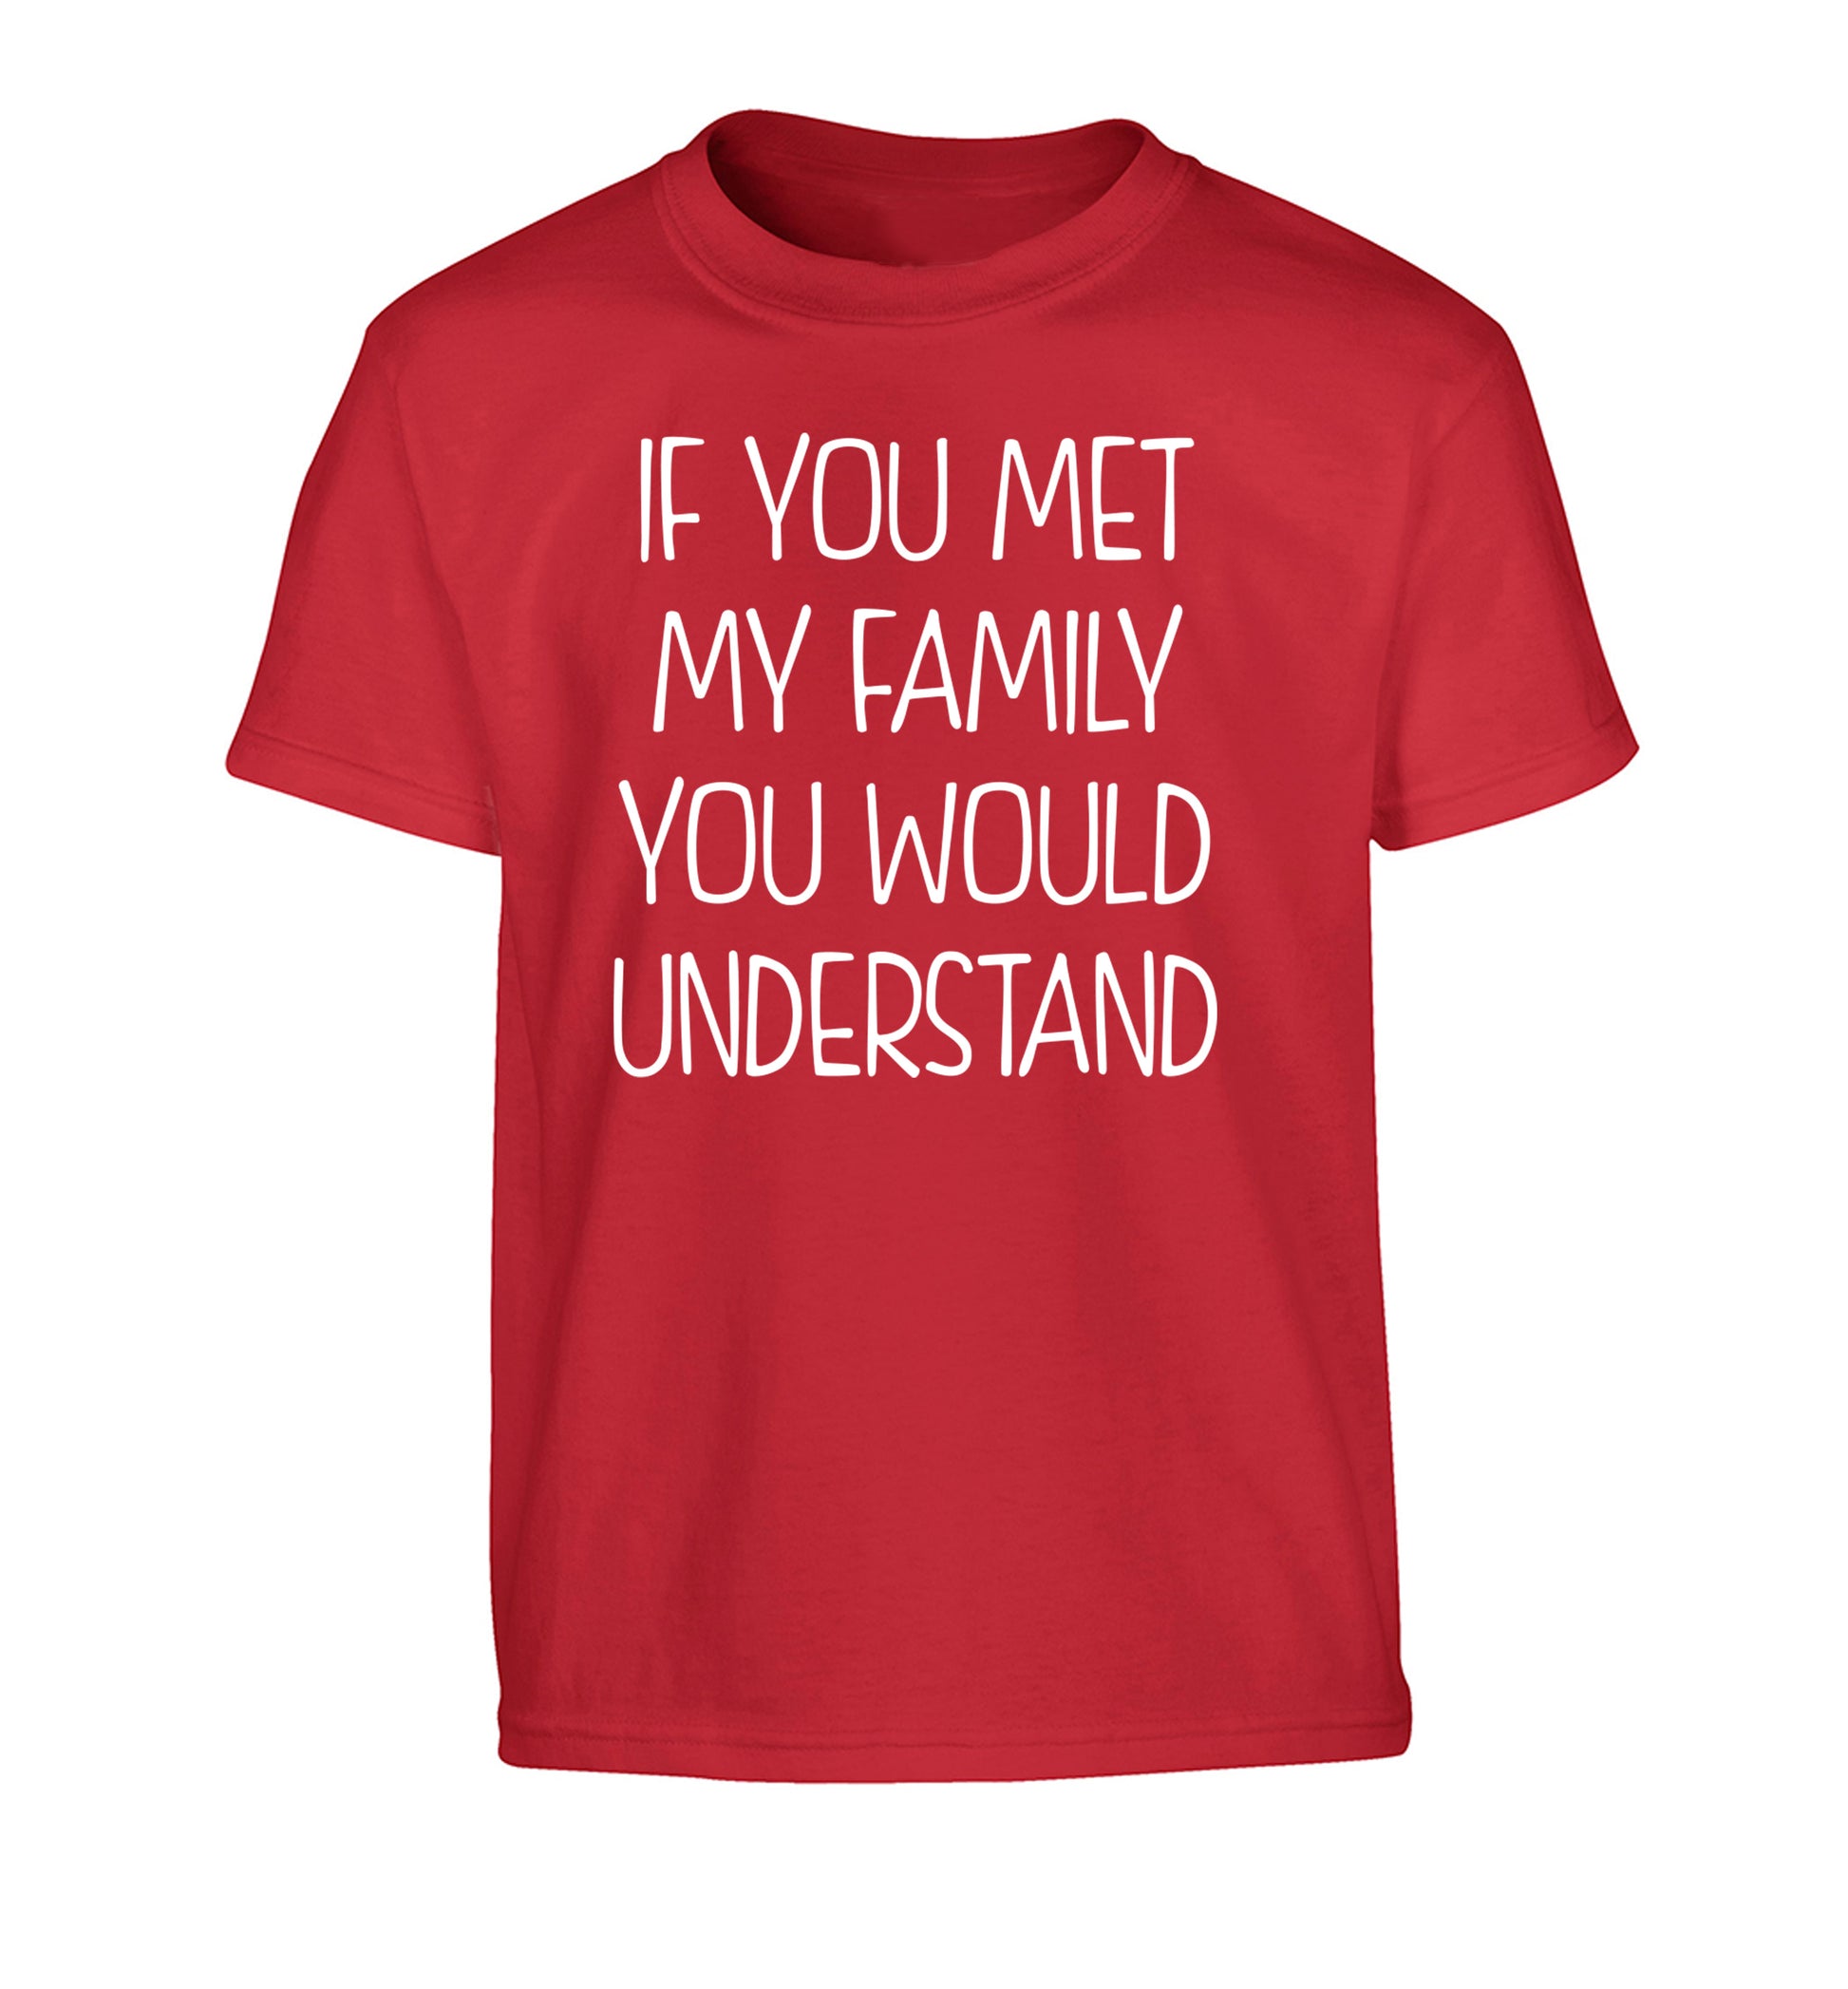 If you met my family you would understand Children's red Tshirt 12-13 Years